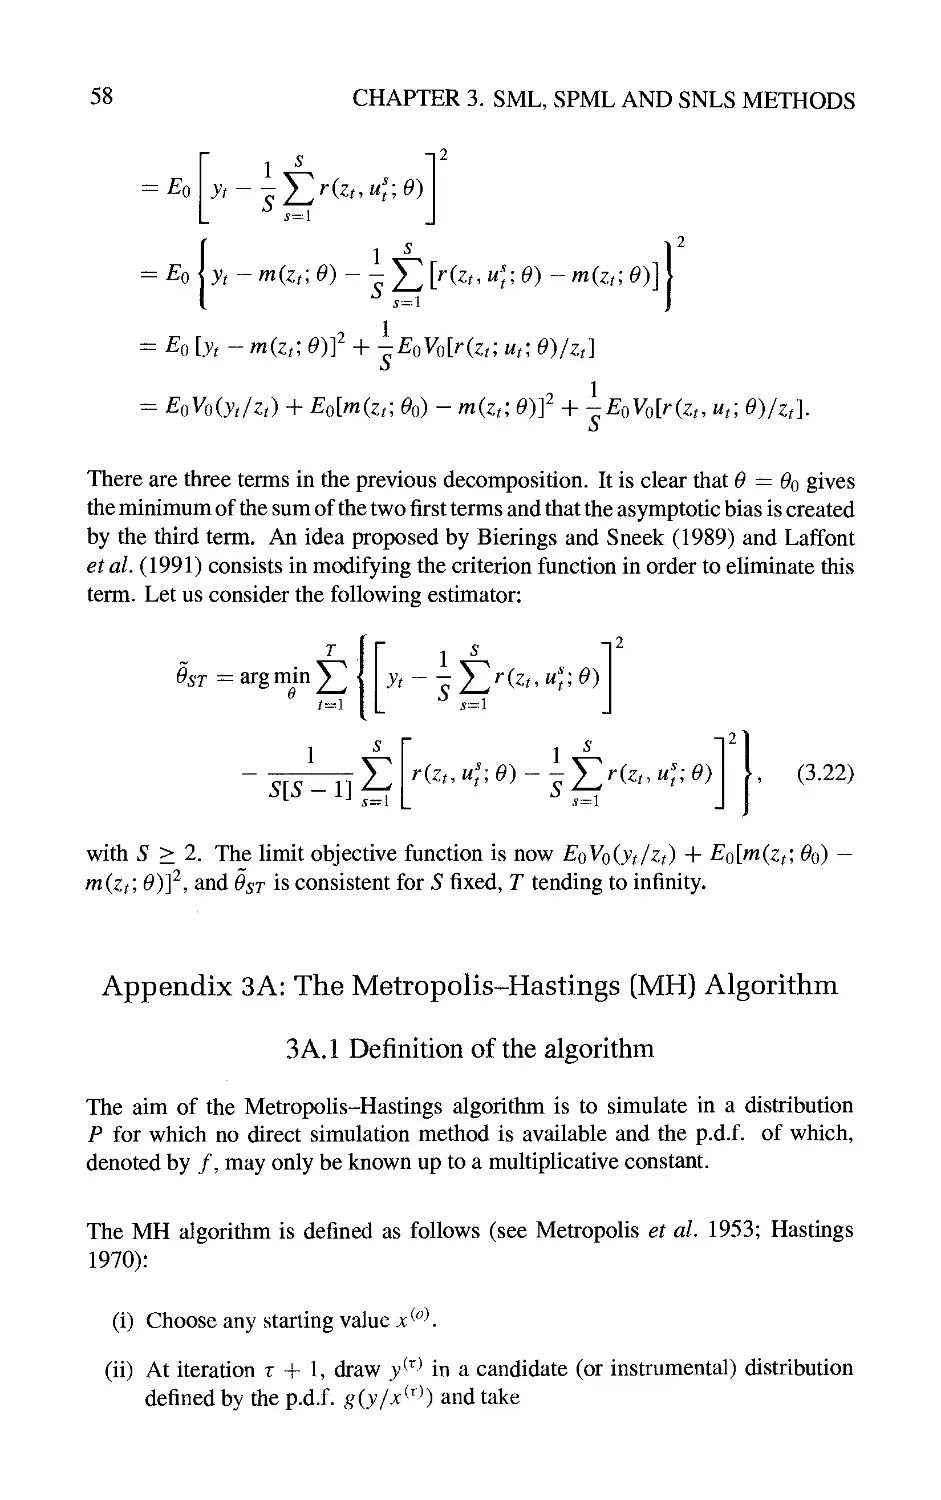 3A.1 Definition of the algorithm